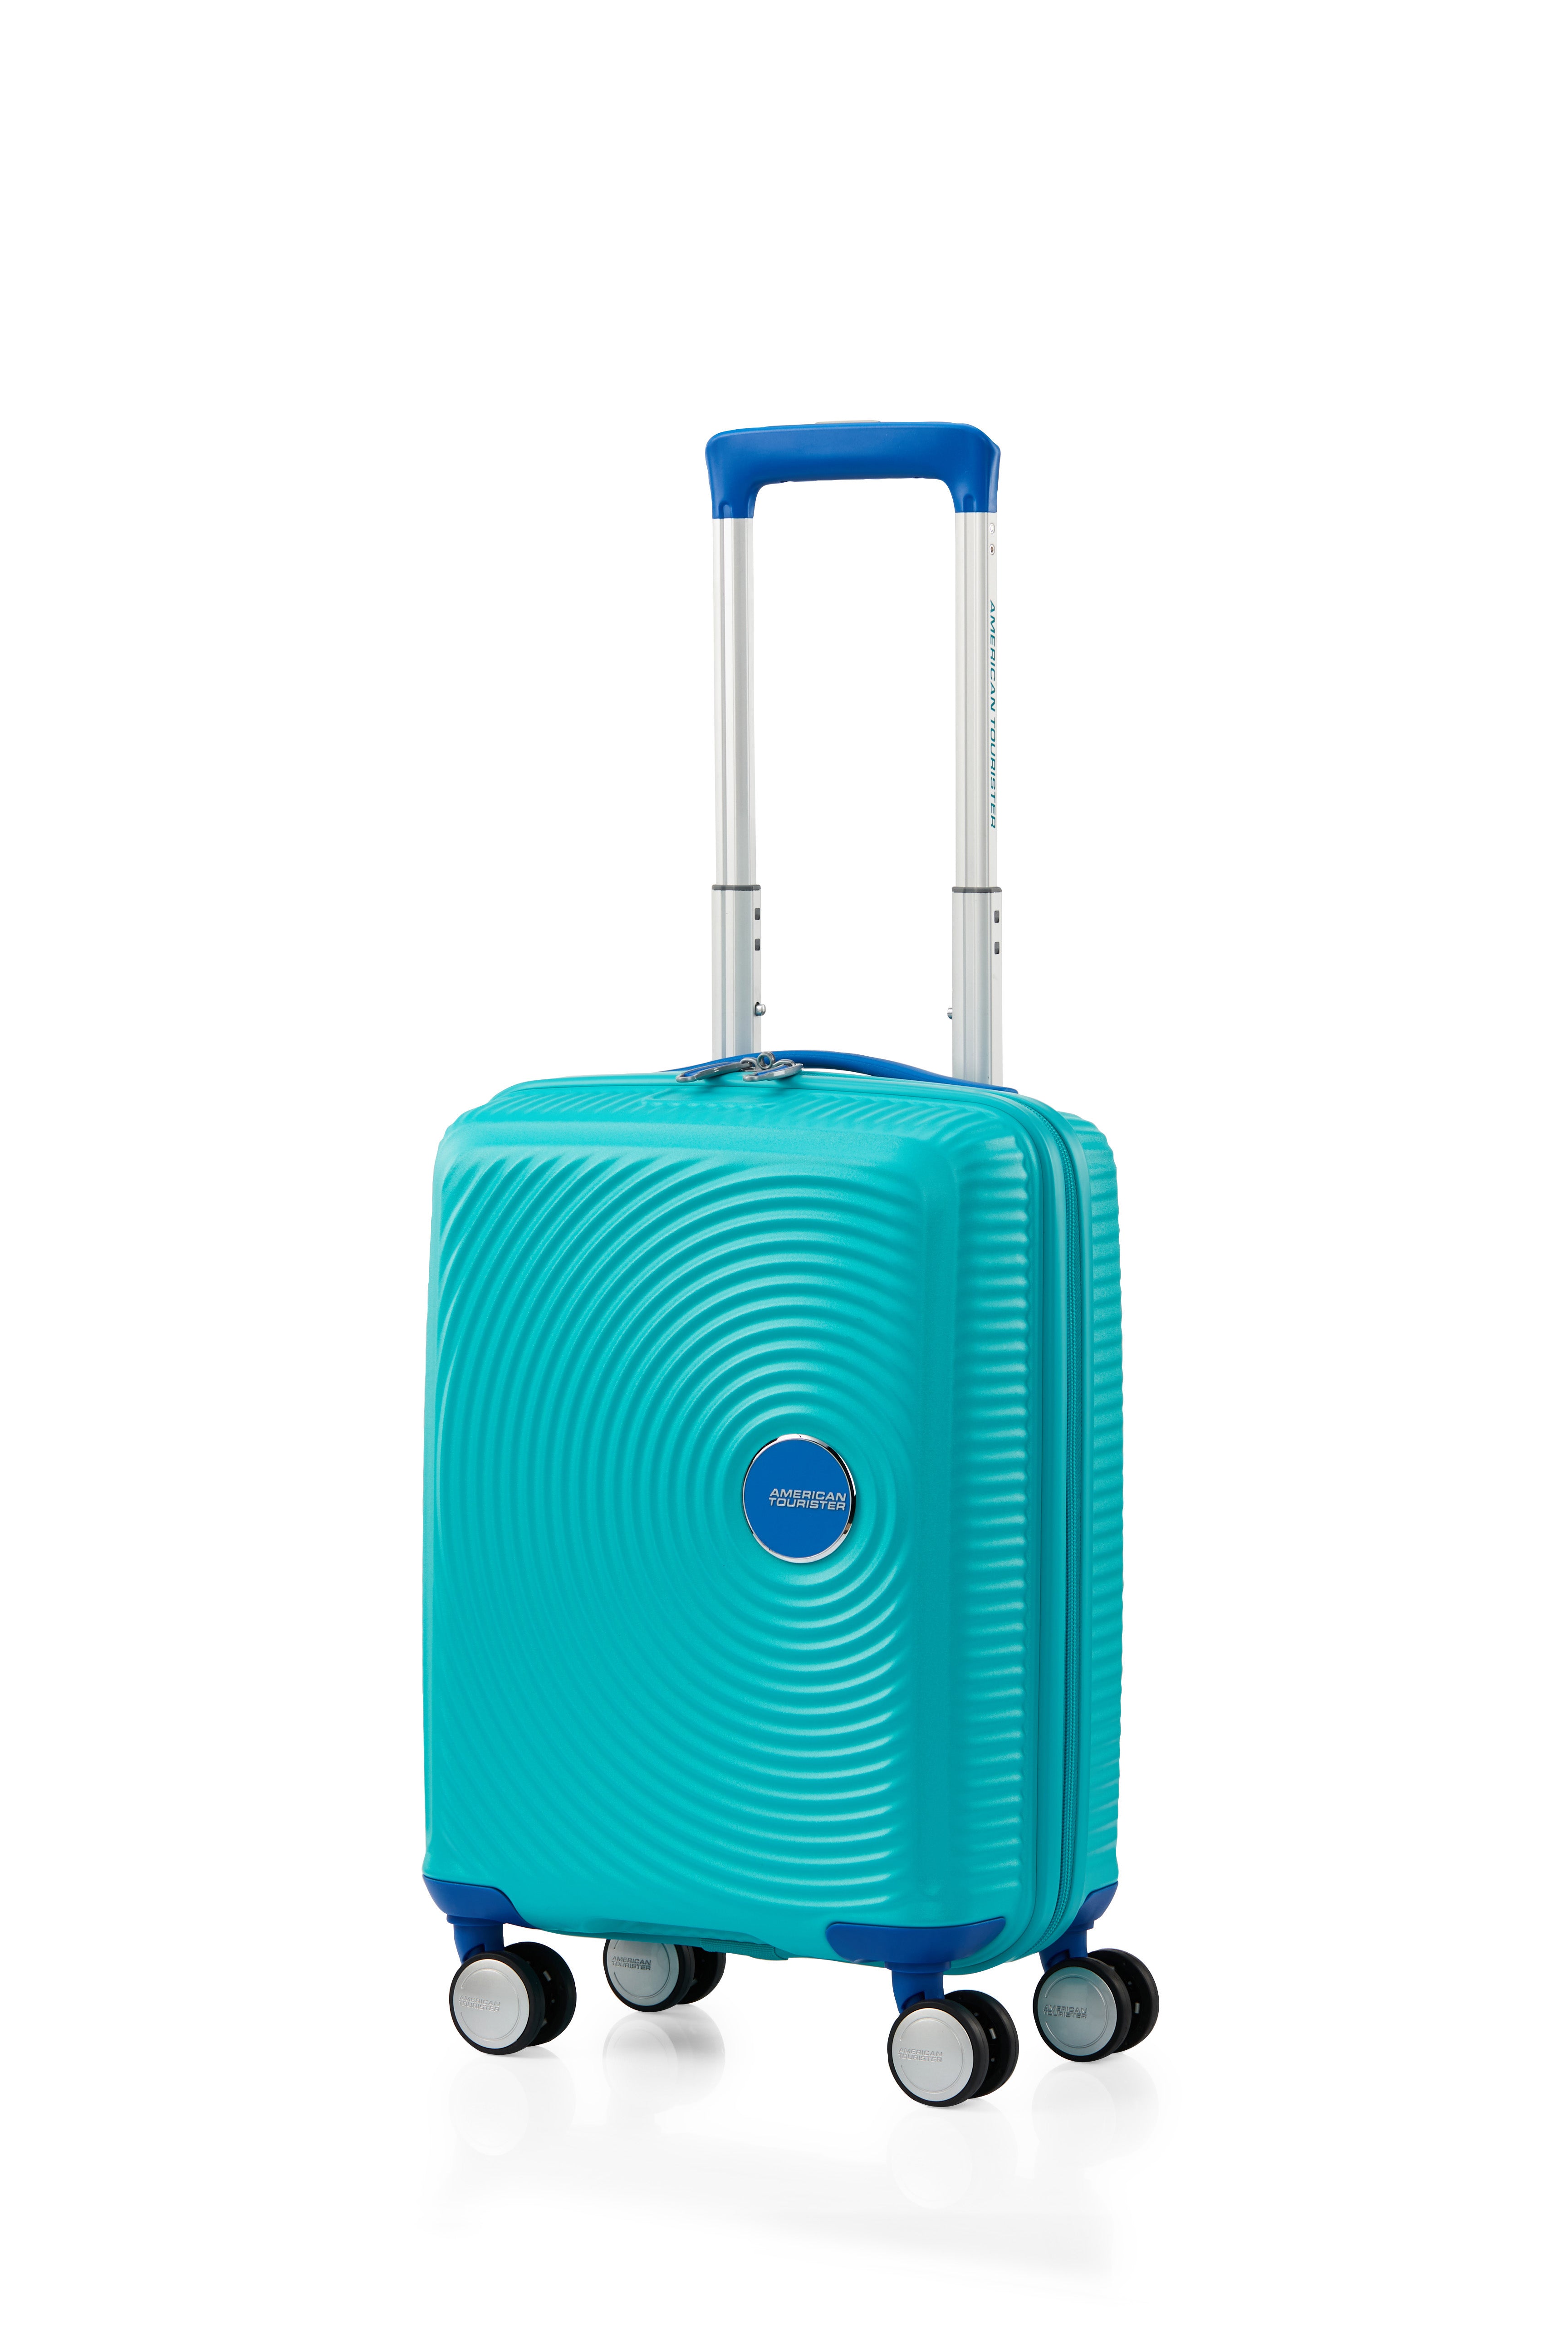 American Tourister - Little Curio 47cm Spinner - Teal/Blue - 0